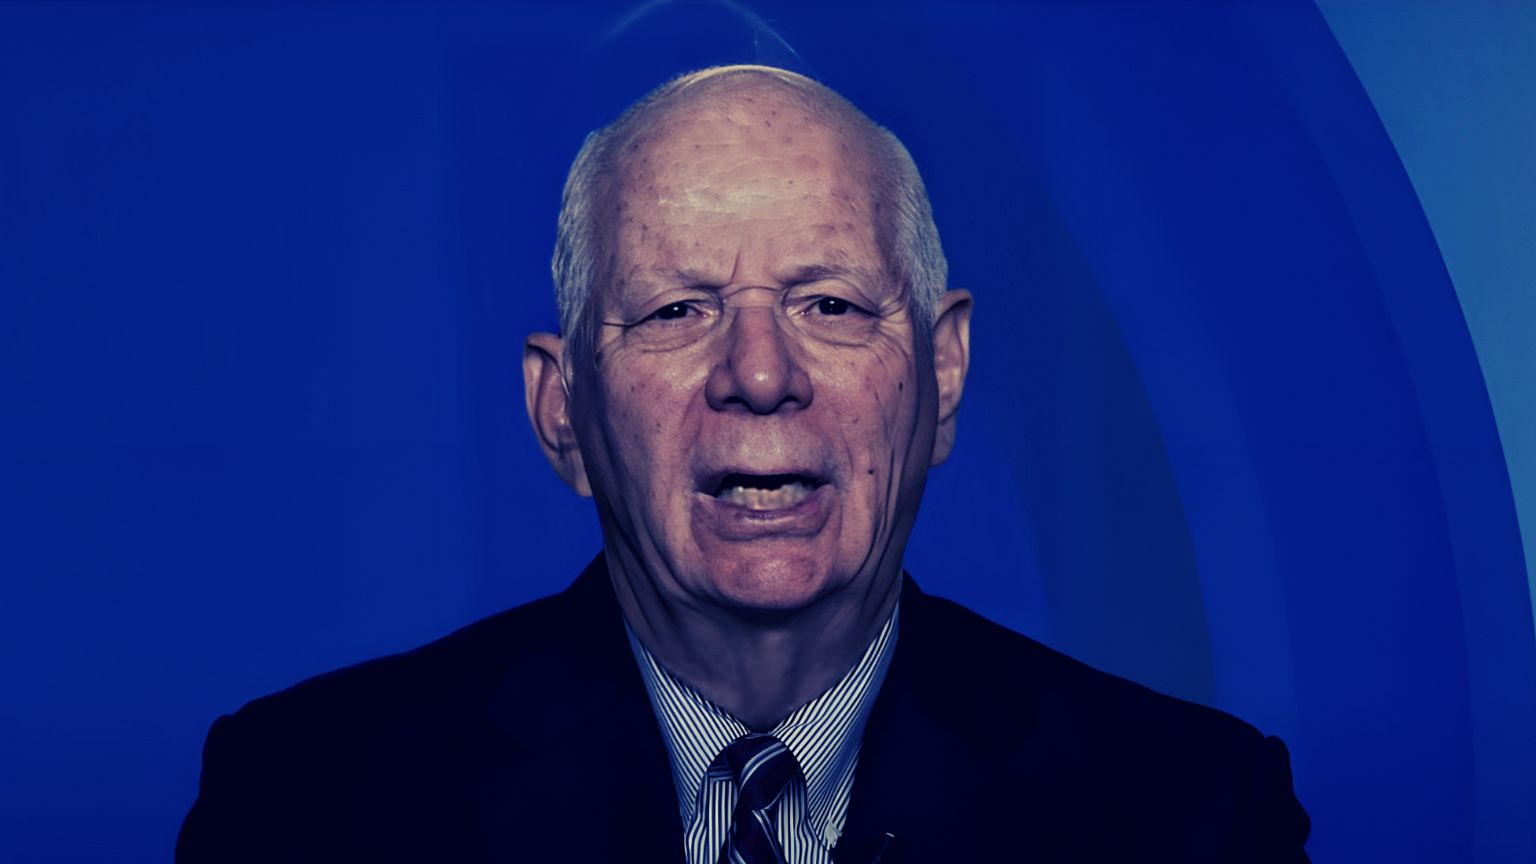 Senator Ben Cardin: Those that “espouse hate” are not protected by the First Amendment